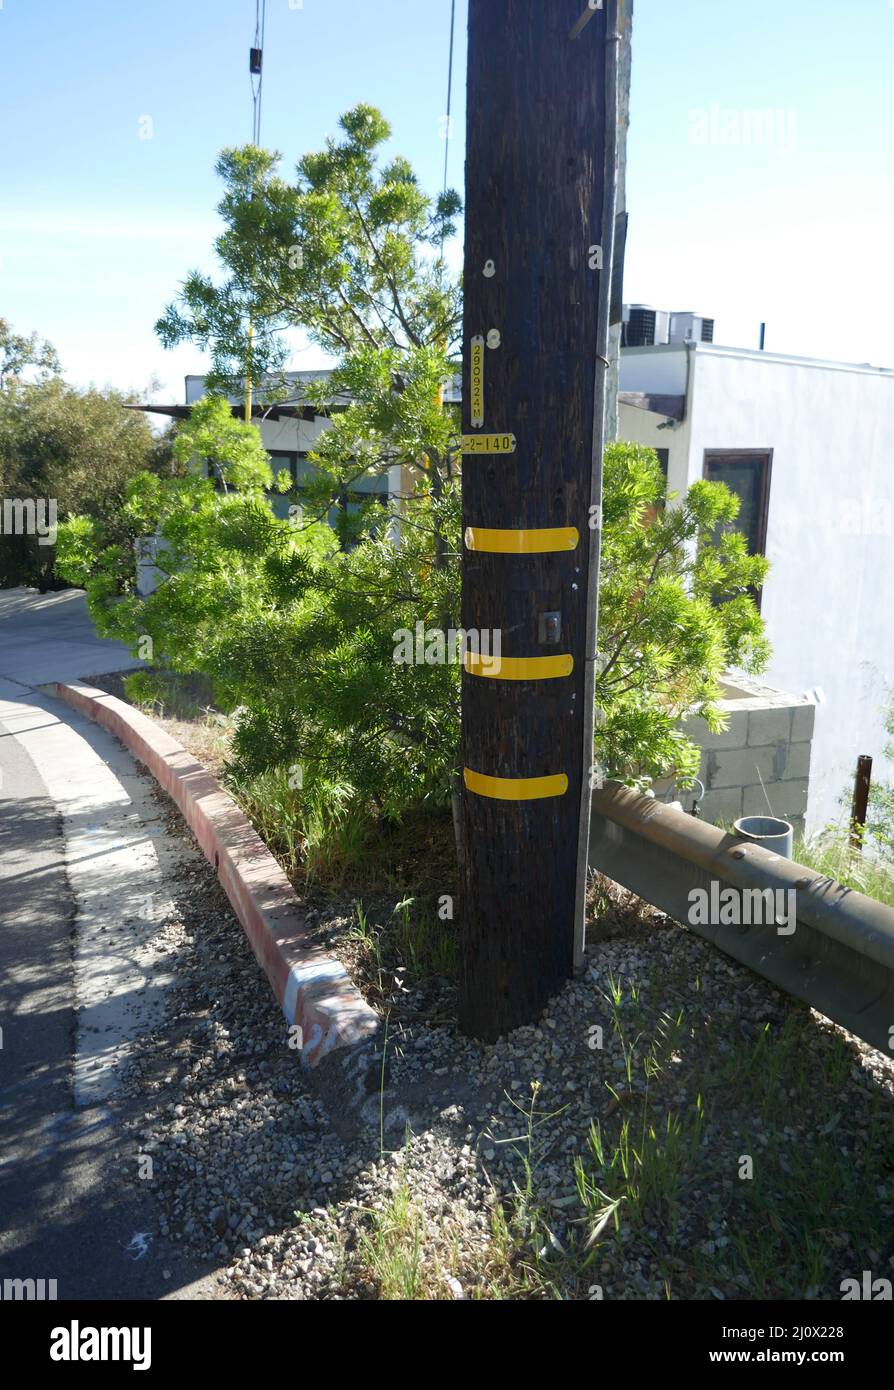 Beverly Hills, California, USA 12th March 2022 A General view of atmosphere where Actor Montgomery Clift had a Car Crash leaving Elizabeth Taylor's home and driving down Summitridge Drive where he crashed into this telephone pole on May 12, 1956 in Beverly Hills, California, USA. Photo by Barry King/Alamy Stock Photo Stock Photo